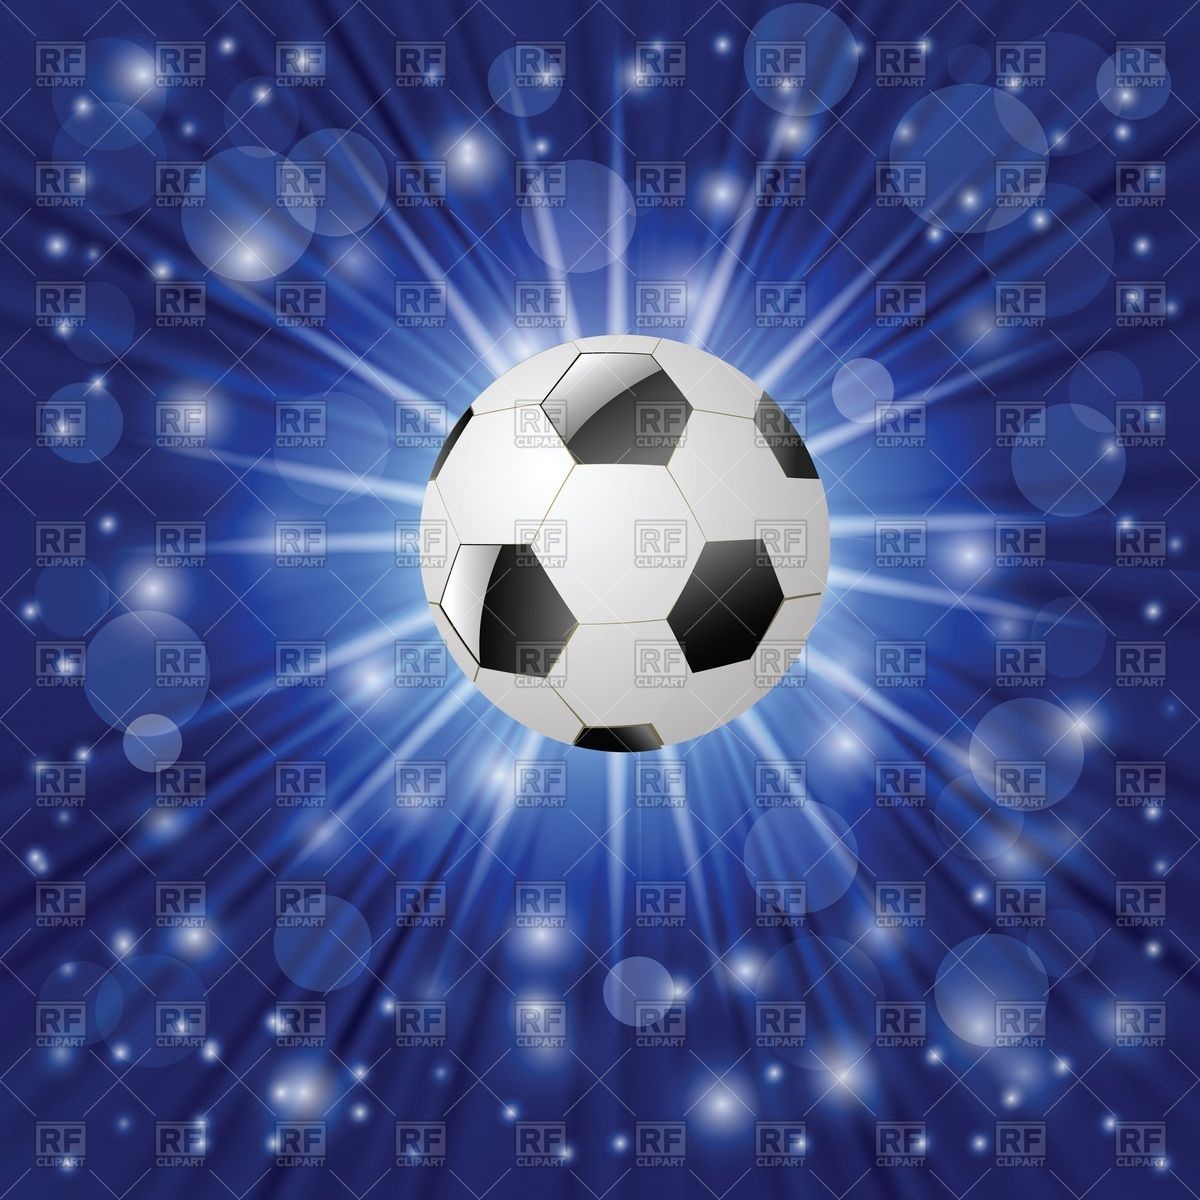 Soccerball On Blue Background With Rays Vector Image Of Sport And